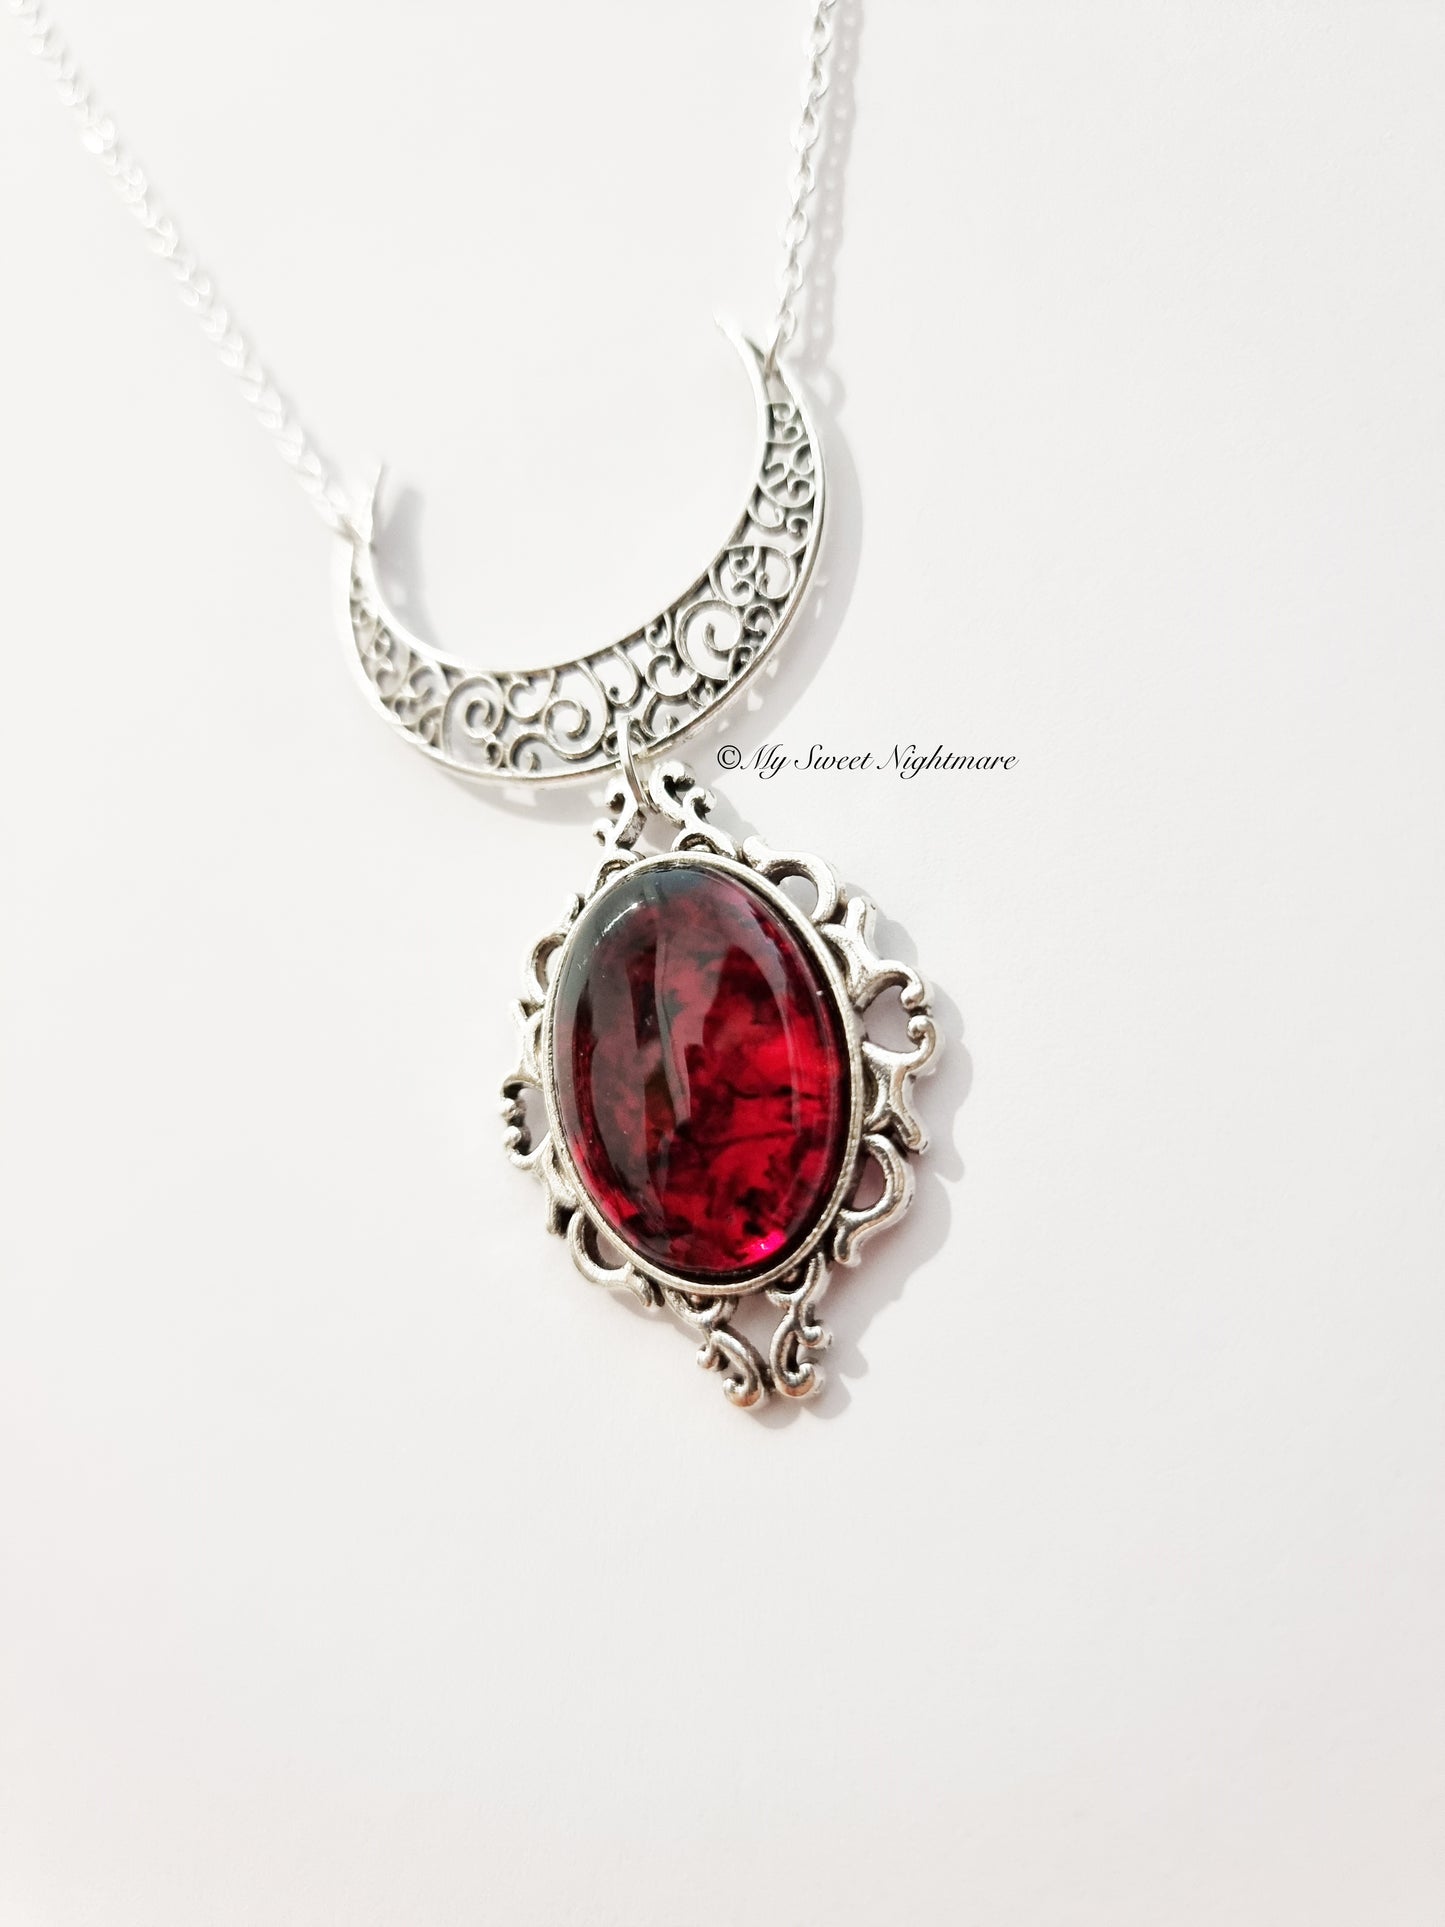 "BLOODMOON" Necklace with half moon and cameo with blood effect cabochon